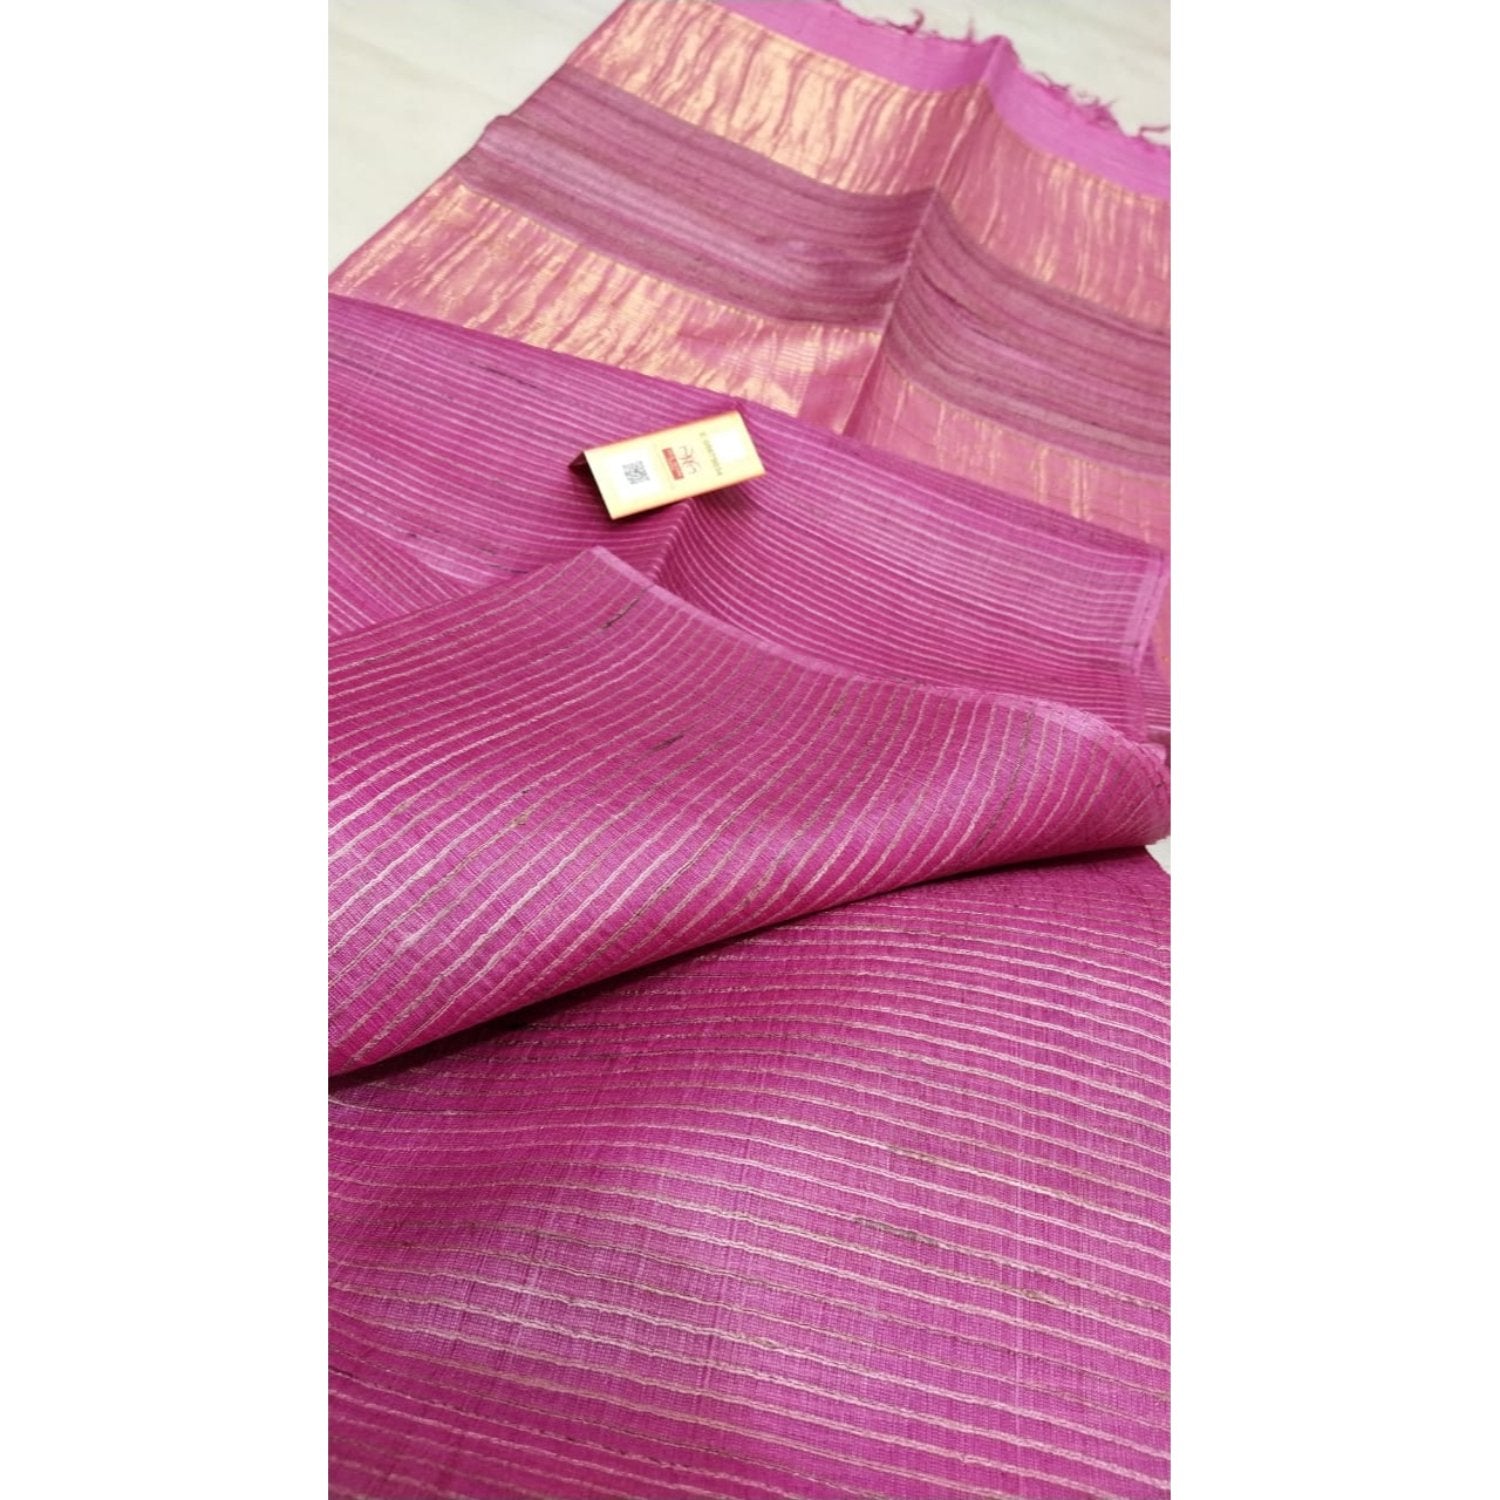 Silkmark Certified Eri Silk with Gichcha Tussar Stripes Hand Dyed pink Saree with Blouse-Indiehaat